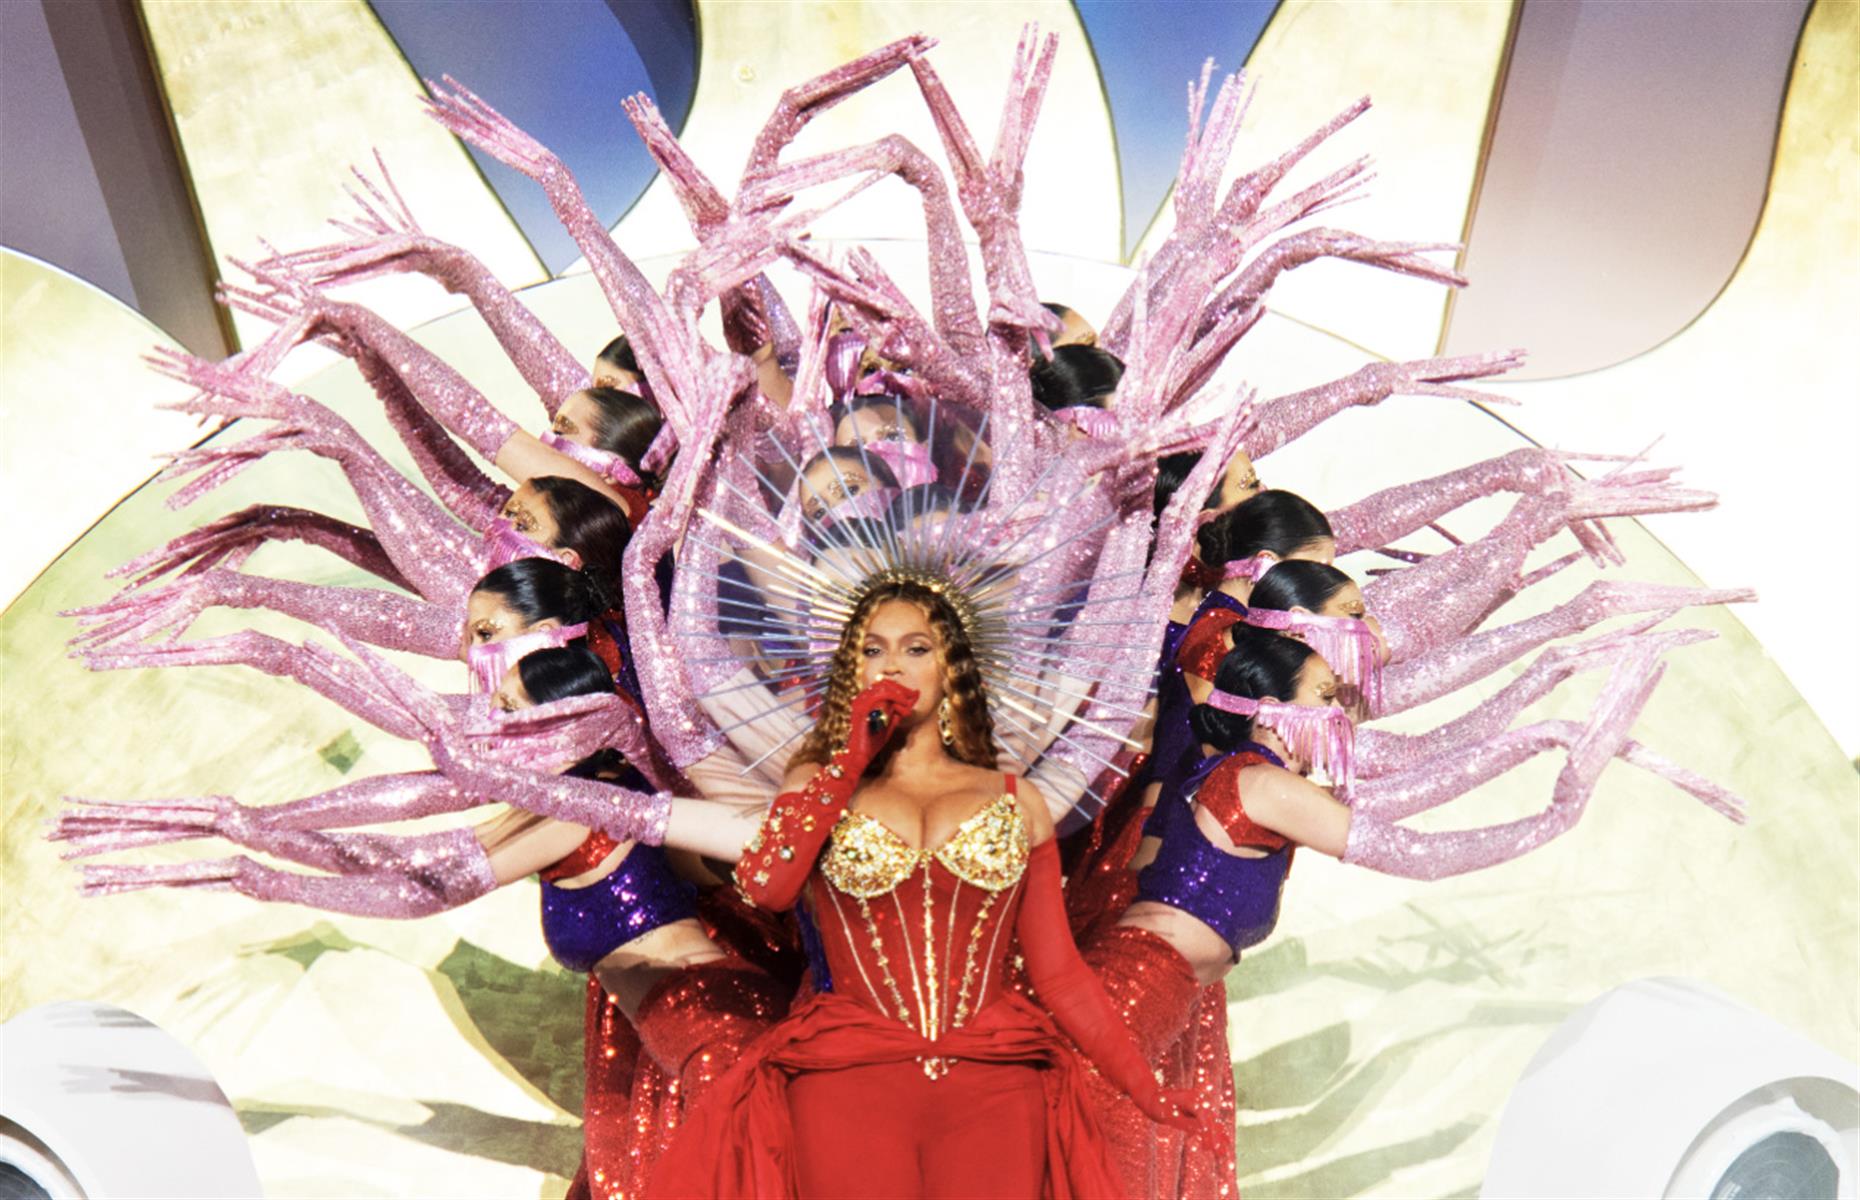 <p>Beyoncé recently performed at the grand opening of the opulent Atlantis The Royal hotel in Dubai, receiving an eye-watering $24 million payday for her hour-long private concert (pictured). The average cost of a room at the swanky new resort is a cool $1,000 per night, though the most luxurious go for an incredible $100,000, with the superstar reportedly opting to stay in one of the top-end suites during her visit.</p>  <p>However, Beyoncé has faced a backlash for her Dubai performance, with some fans calling the star "hypocritical." Her latest album, <em>Renaissance</em>, paid homage to LGBTQ+ culture, but same-sex relationships are illegal in the United Arab Emirates and punishable by imprisonment or even death. </p>